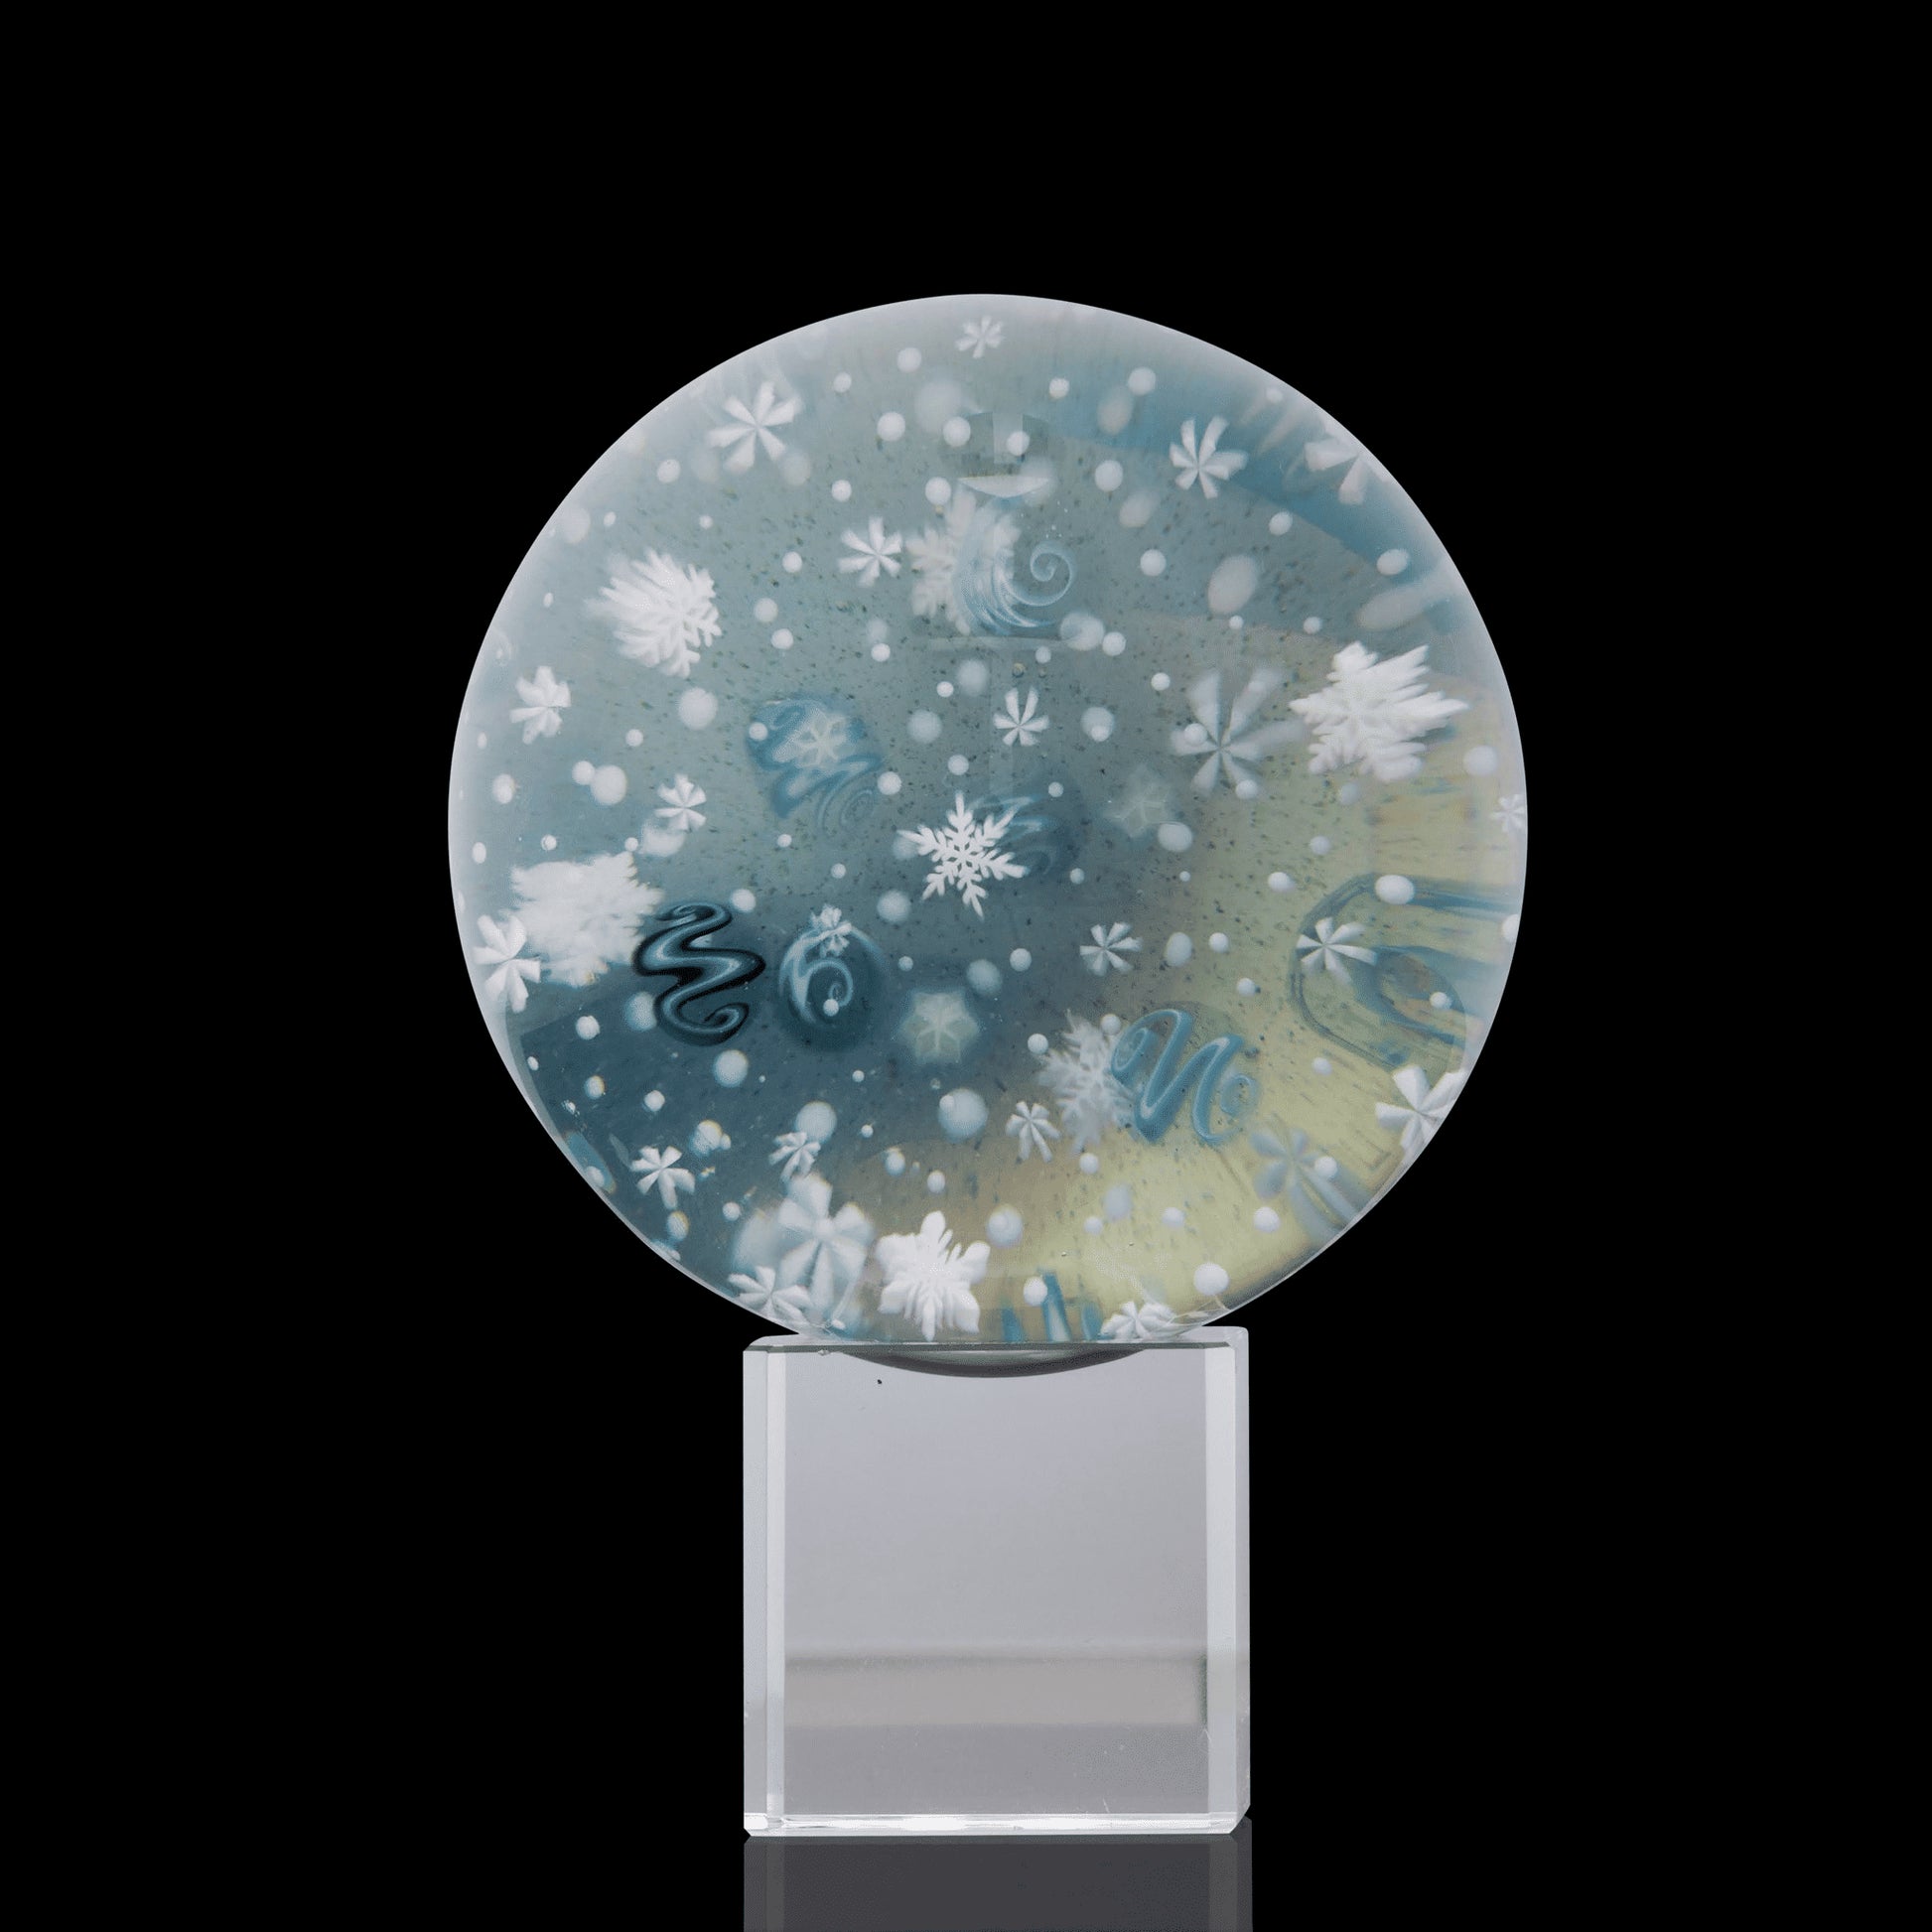 meticulously crafted art piece - Blizzard Orb Marble by Chaka Glass (SCOPE 2022)